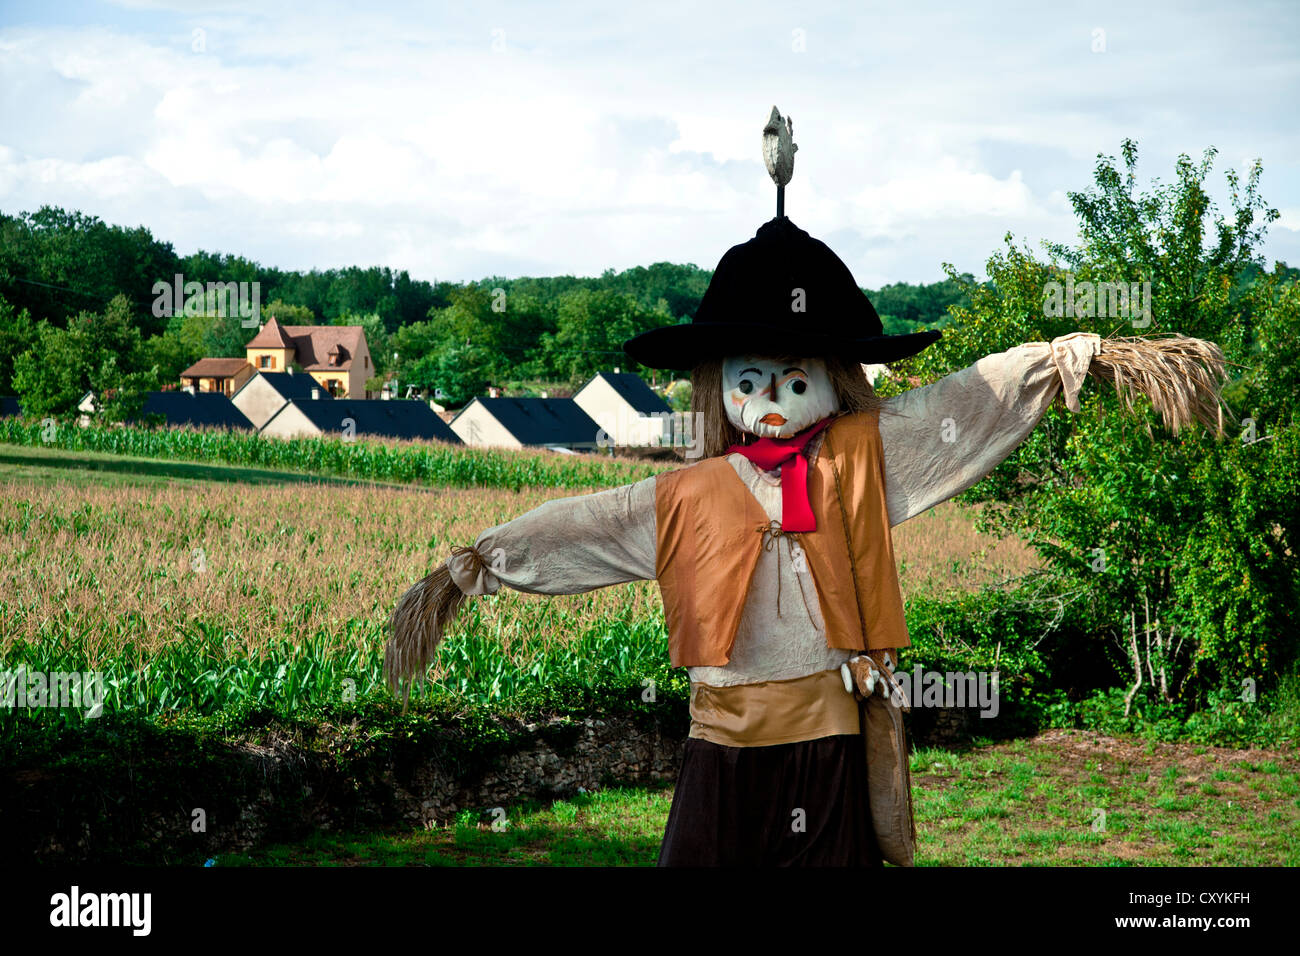 Scarecrow in the town of Meyrals, Dordogne, France, Europe Stock Photo